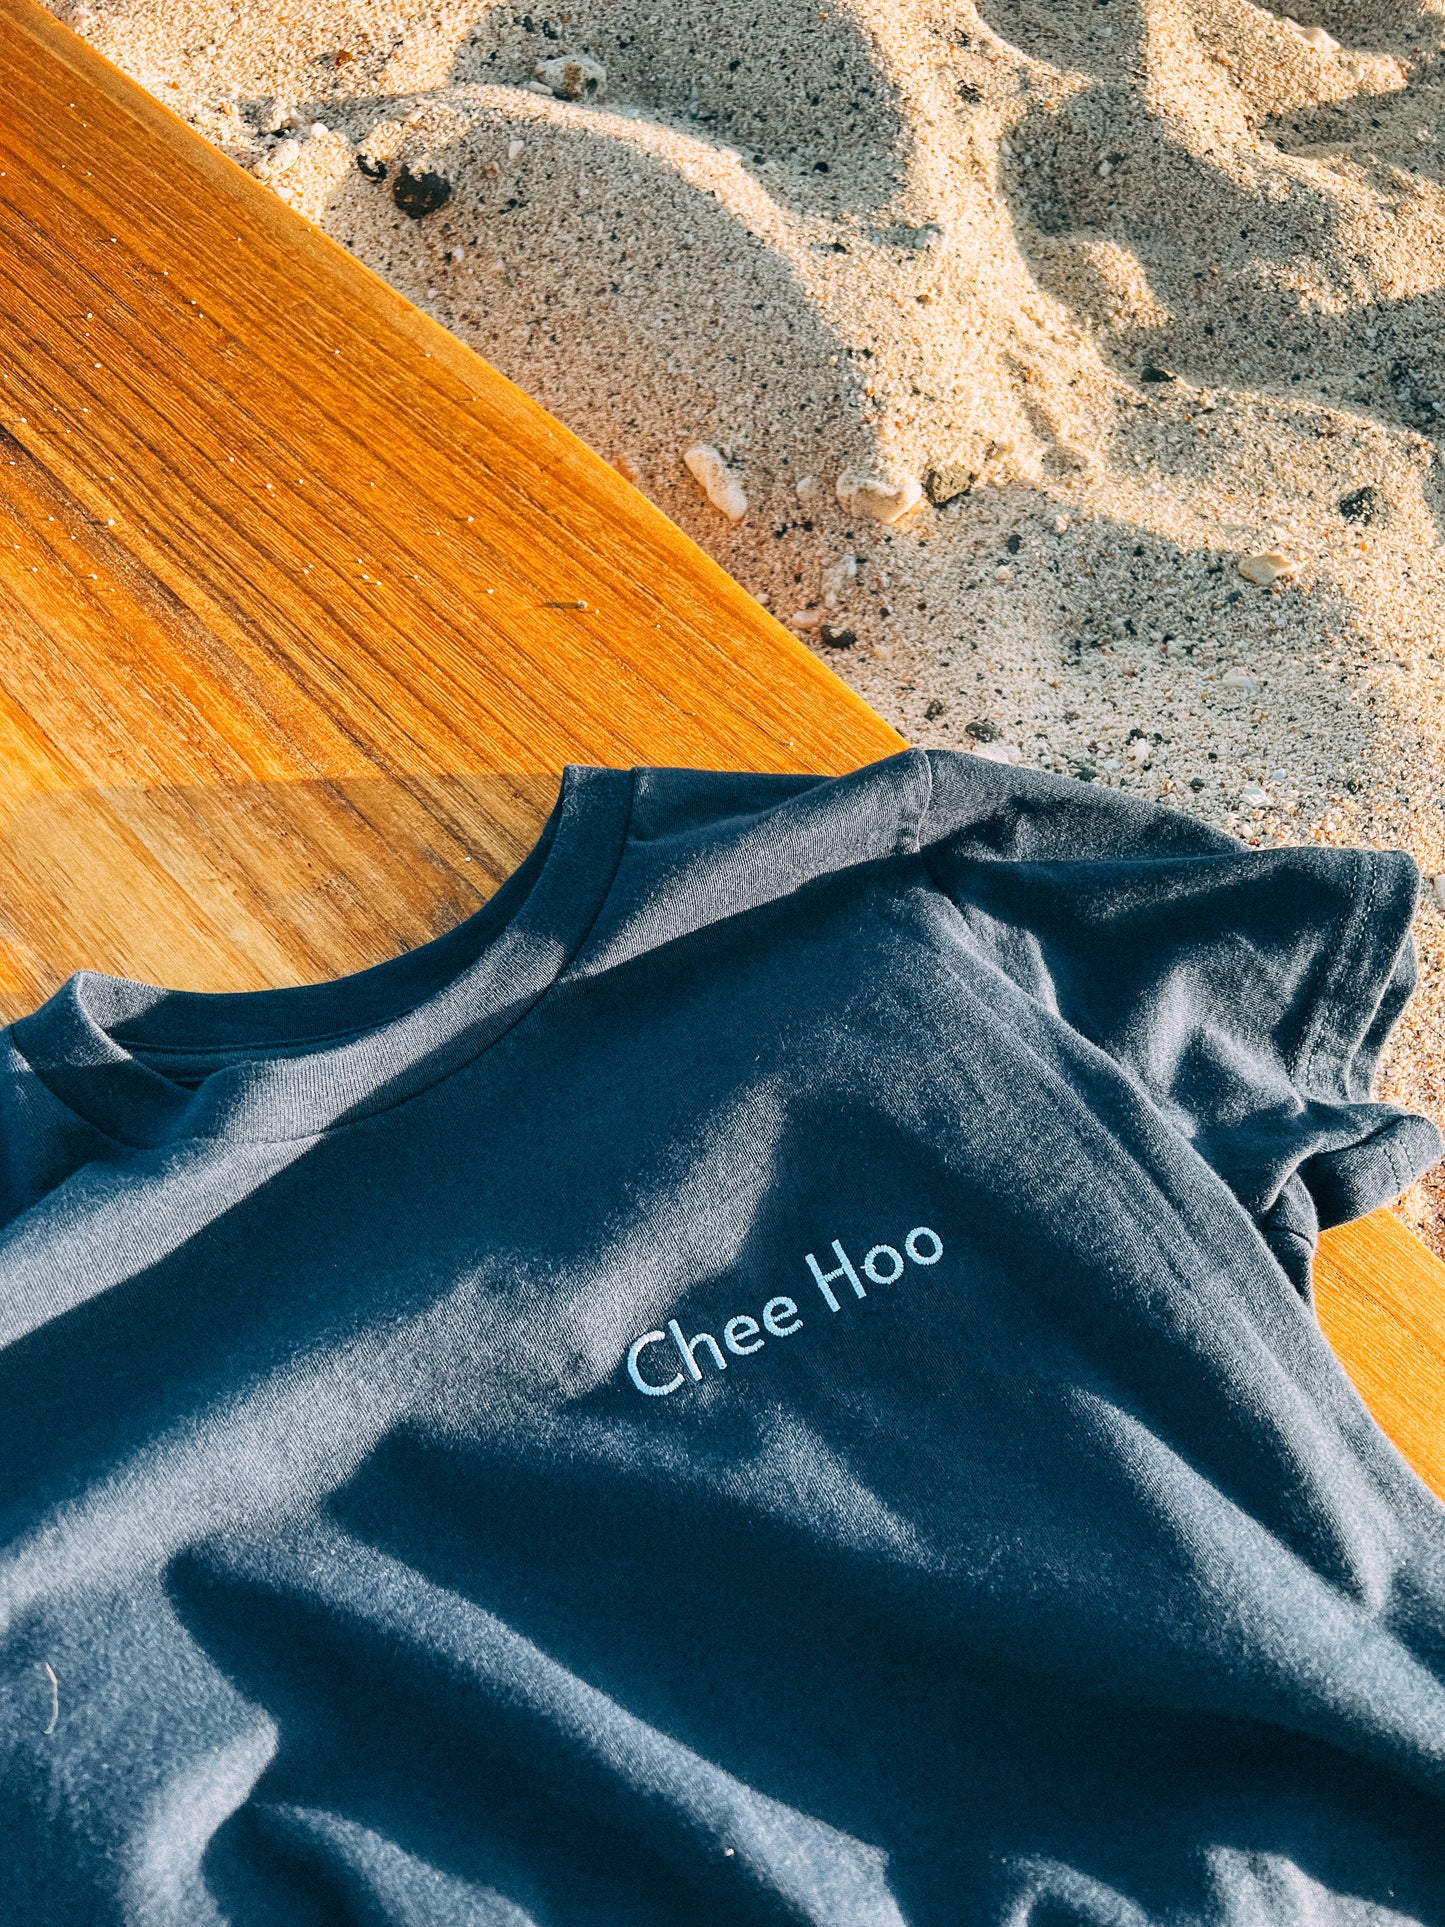 Chee Hoo embroidered T-Shirt